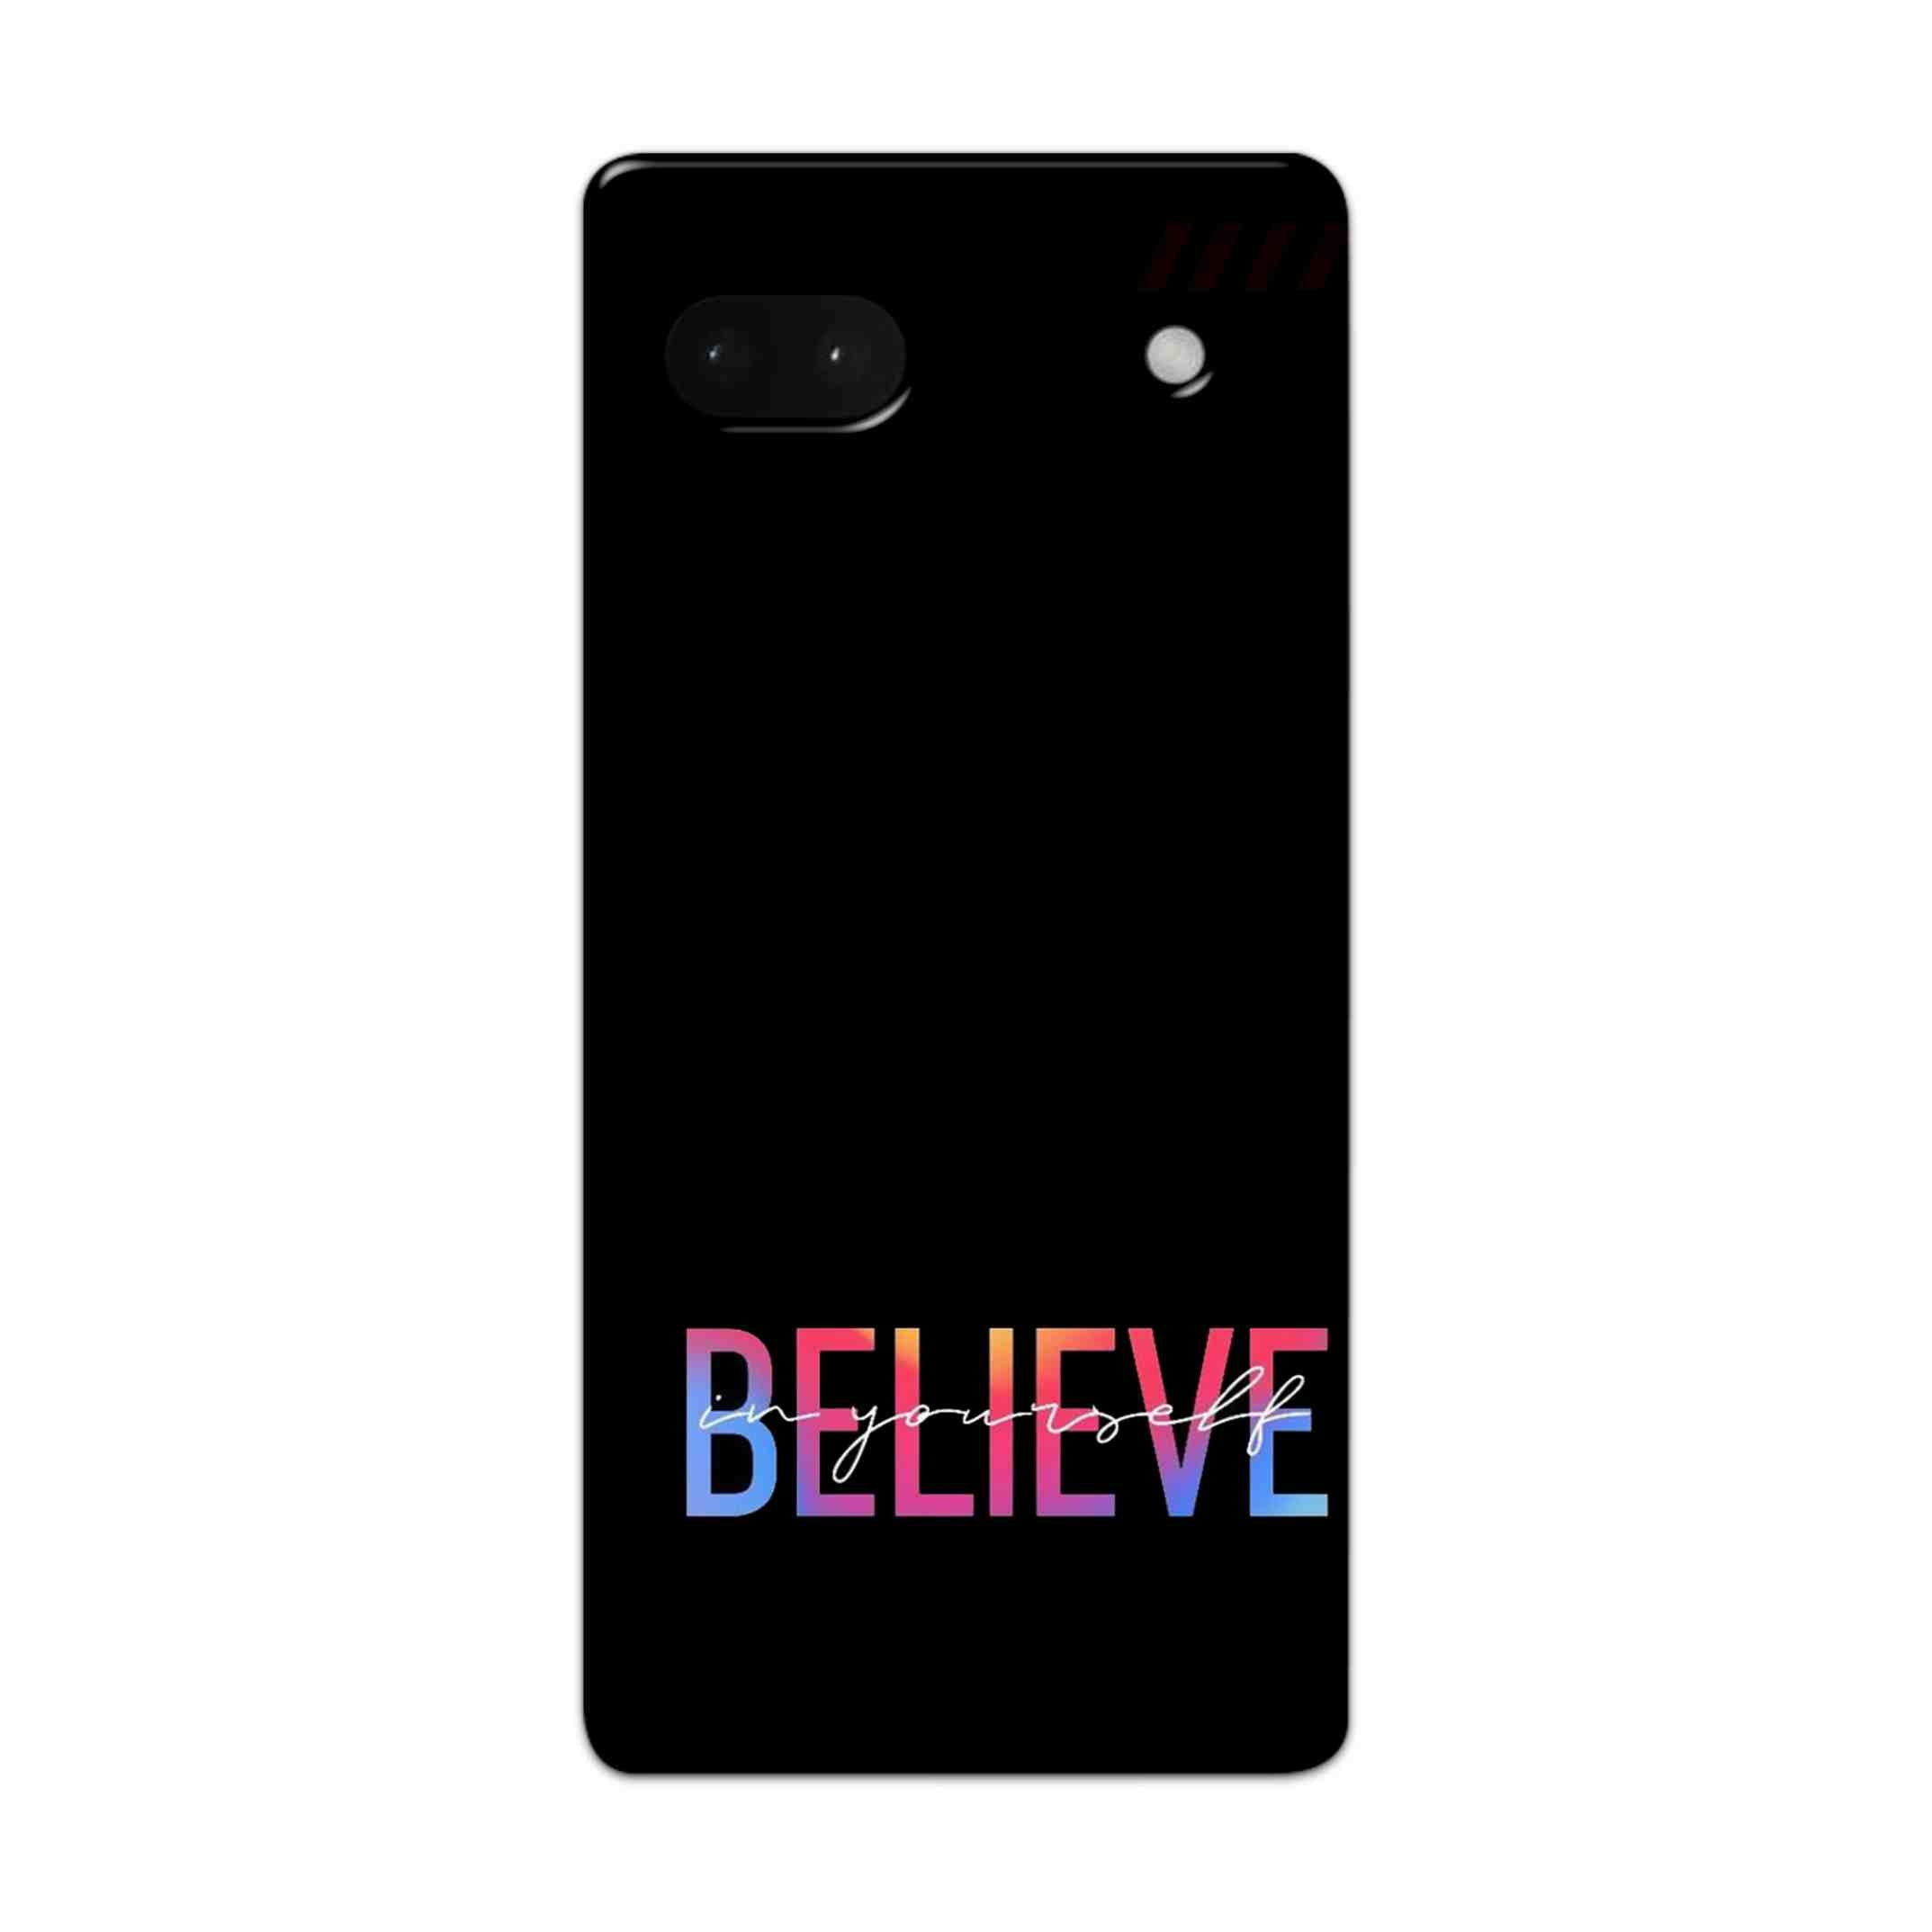 Buy Believe Hard Back Mobile Phone Case Cover For Google Pixel 6a Online